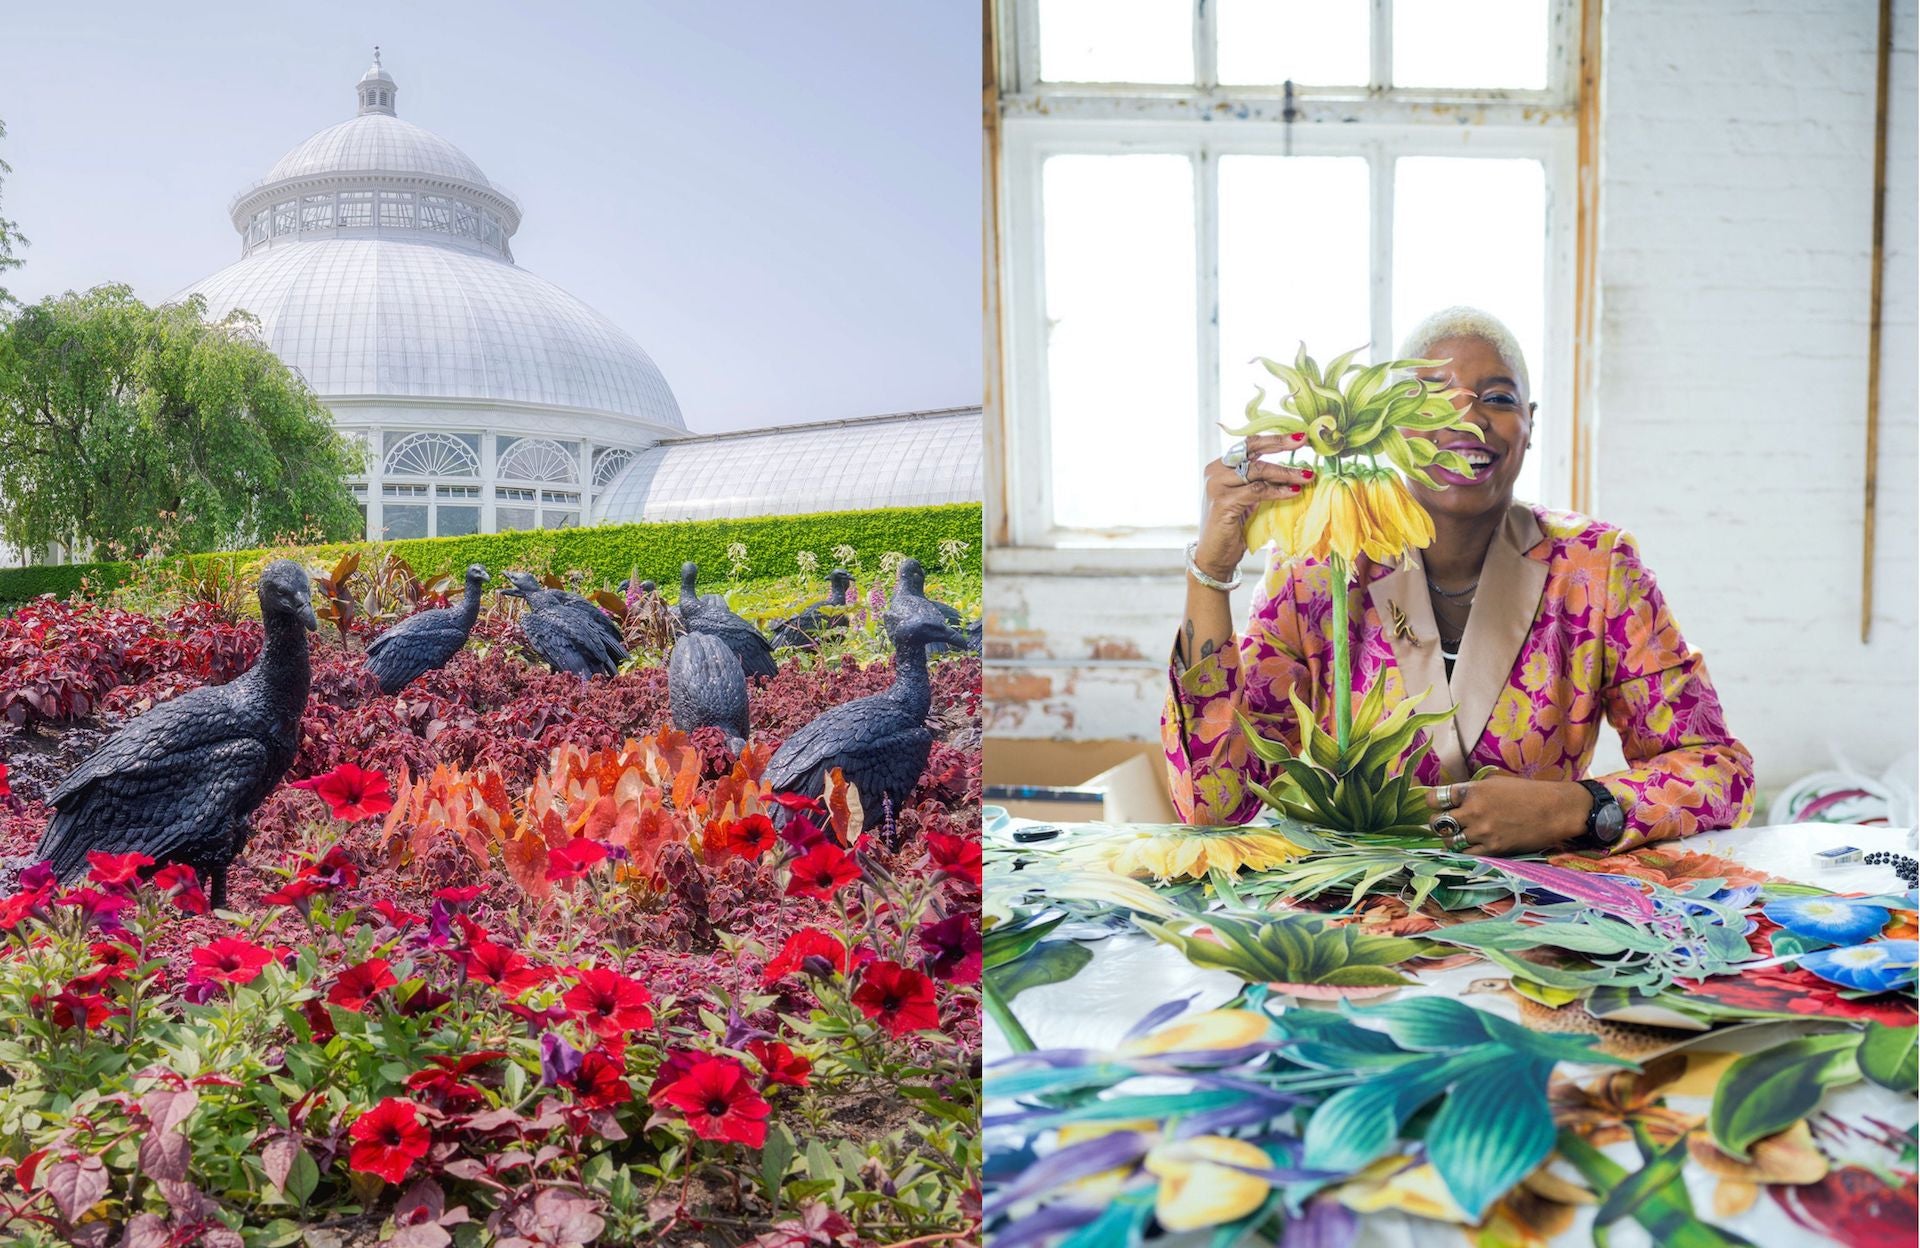 Left: Intervention on the Conservatory Lawn at NYBG, Photo courtesy of NYBG. Right: Ebony G. Patterson. Photo by Frank Ishman; Courtesy of the artist and Monique Meloche Gallery, Chicago